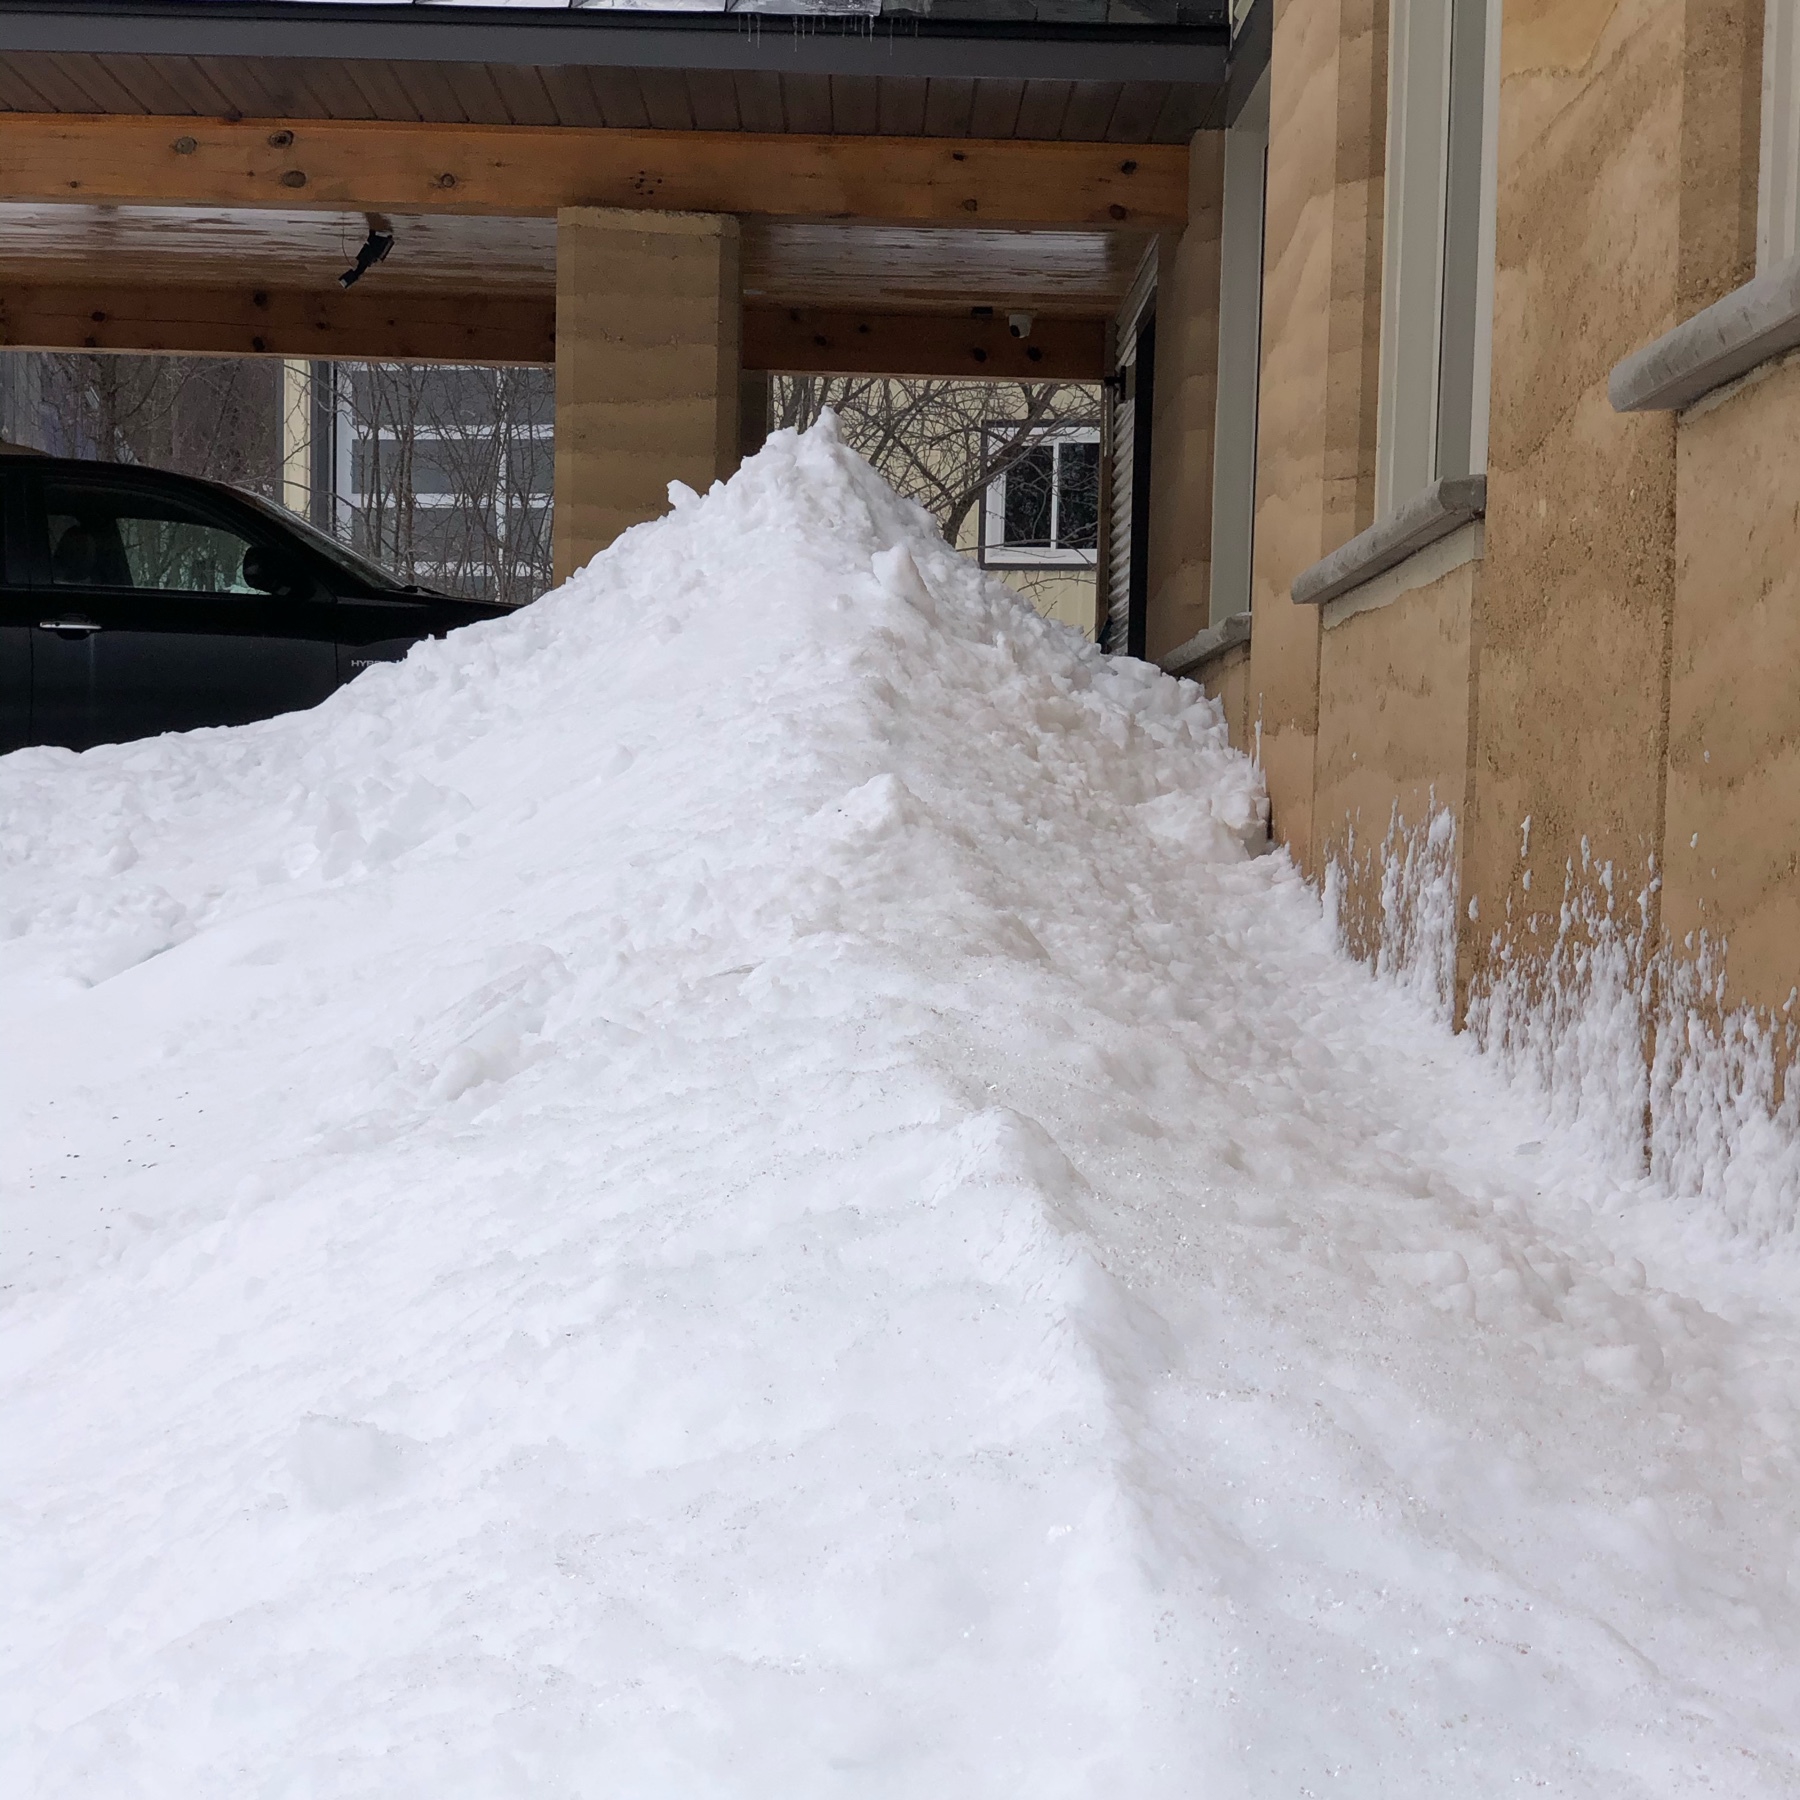 tall, pointed pile of snow next to a house